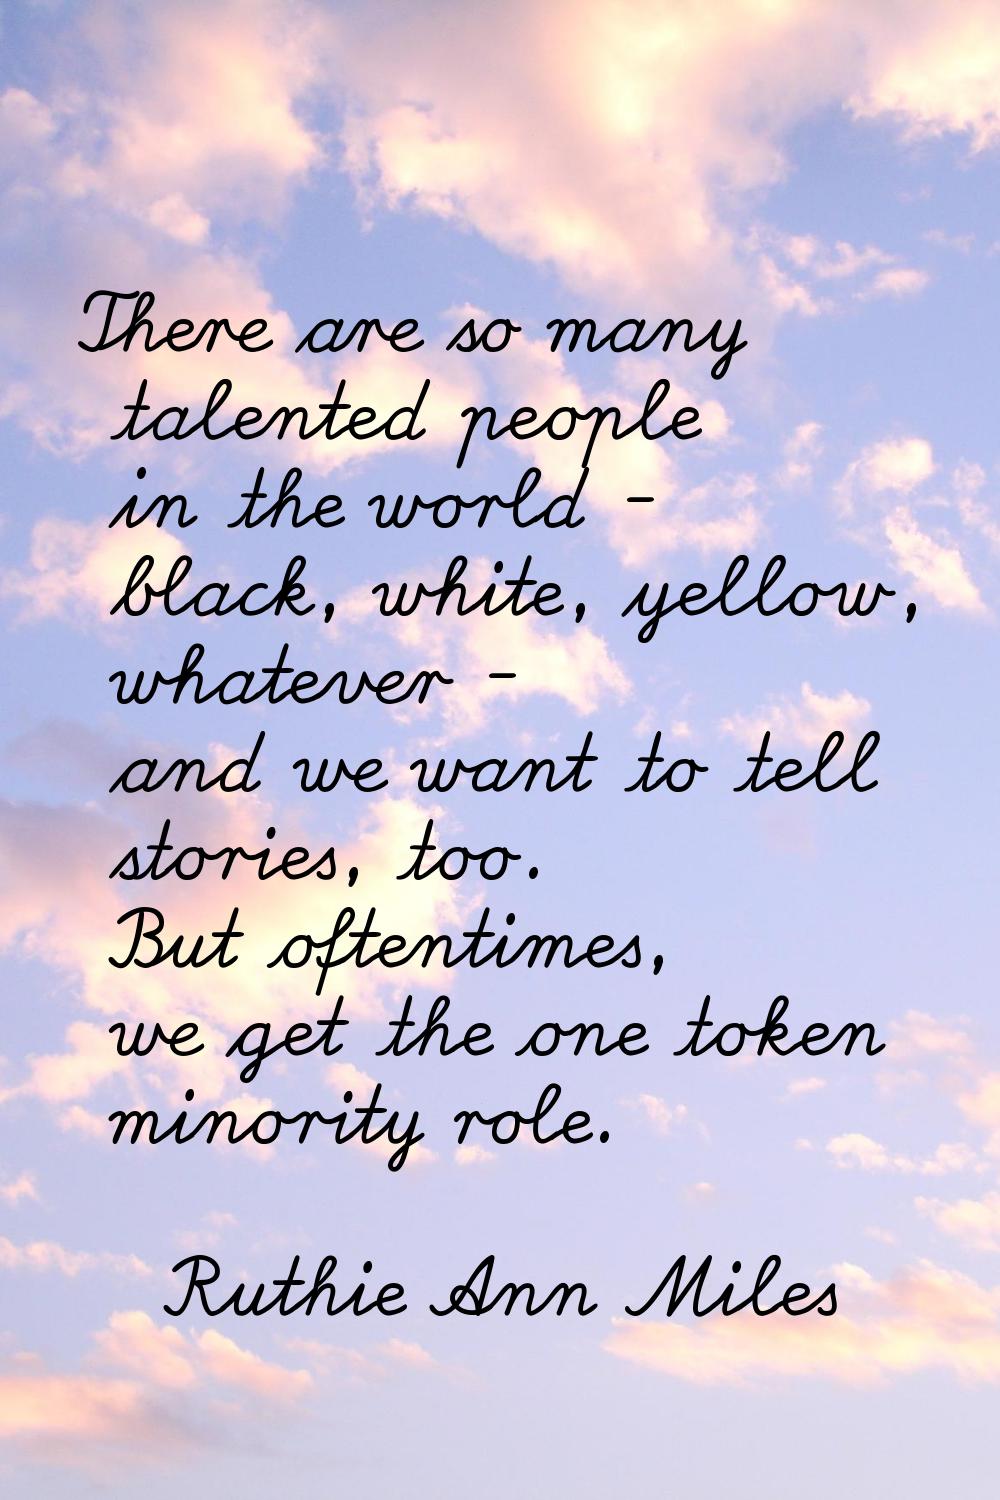 There are so many talented people in the world - black, white, yellow, whatever - and we want to te